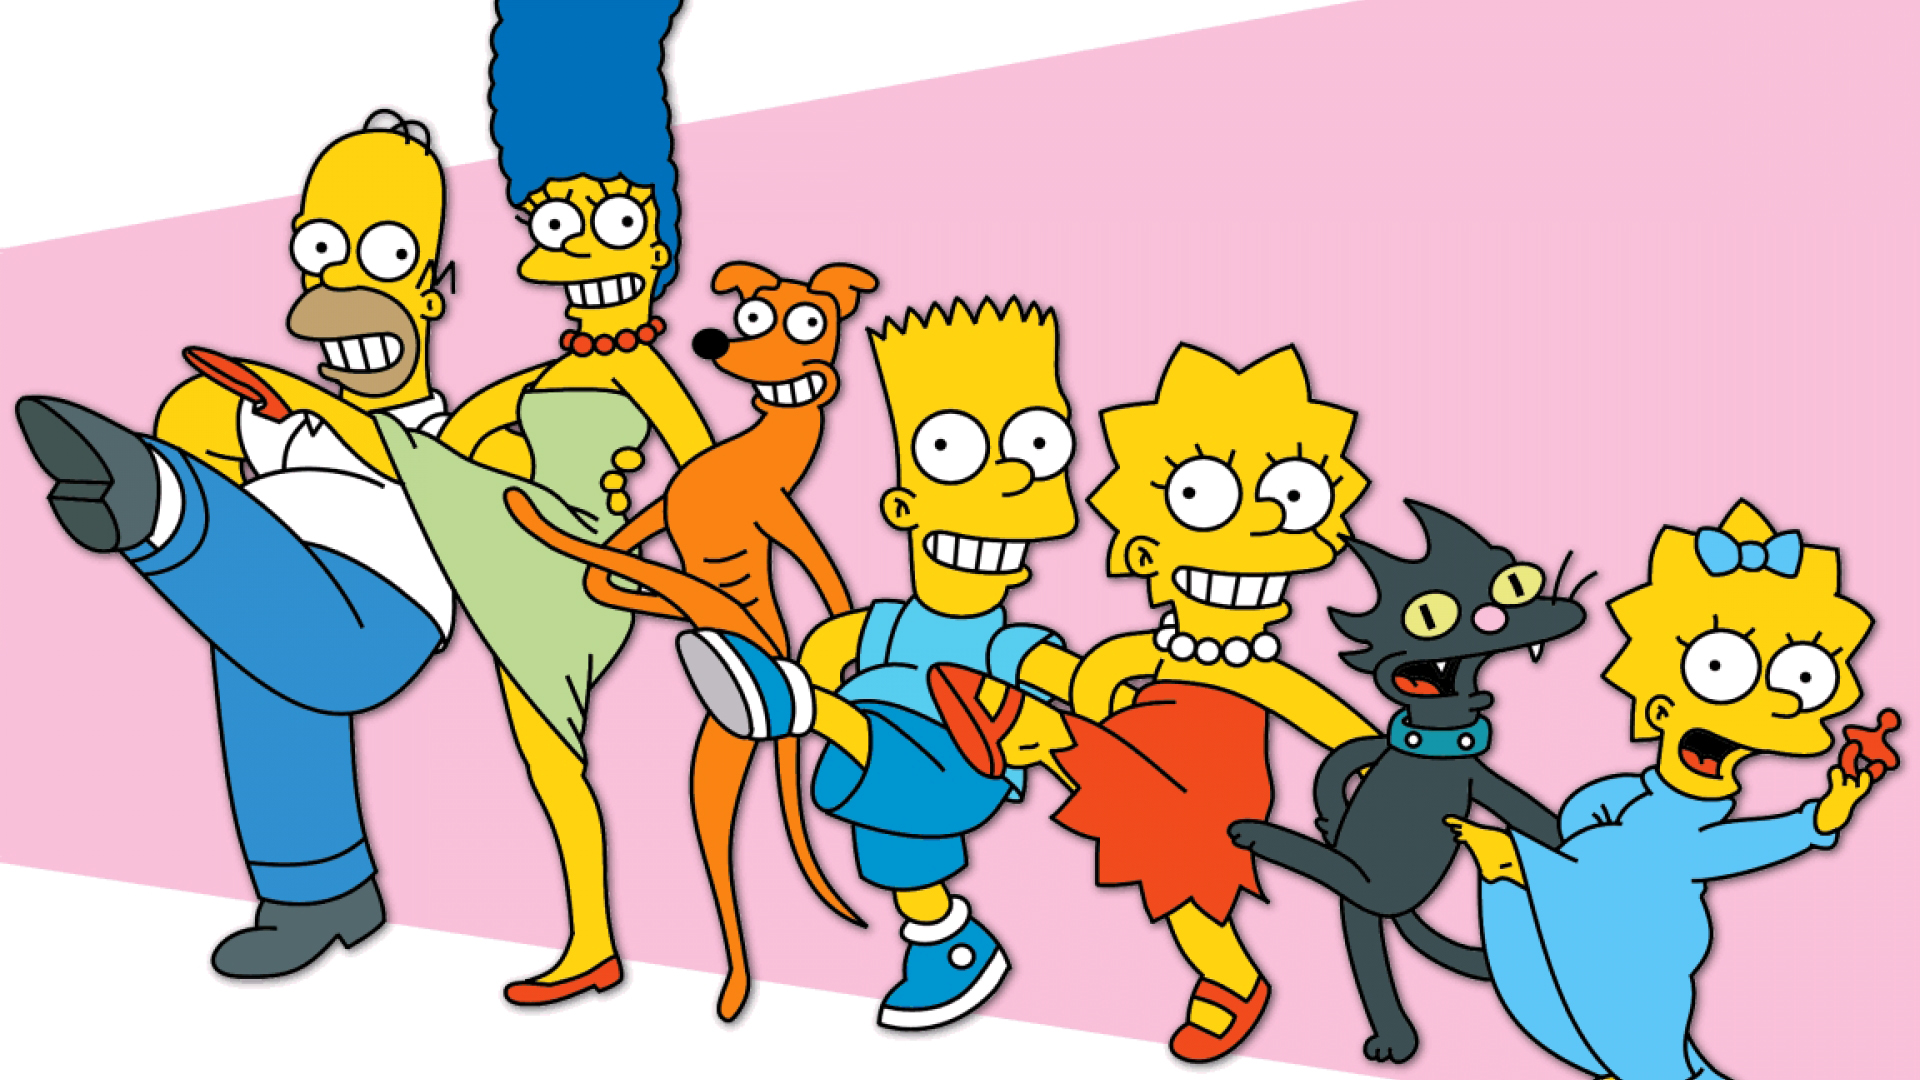 The Simpsons Picture